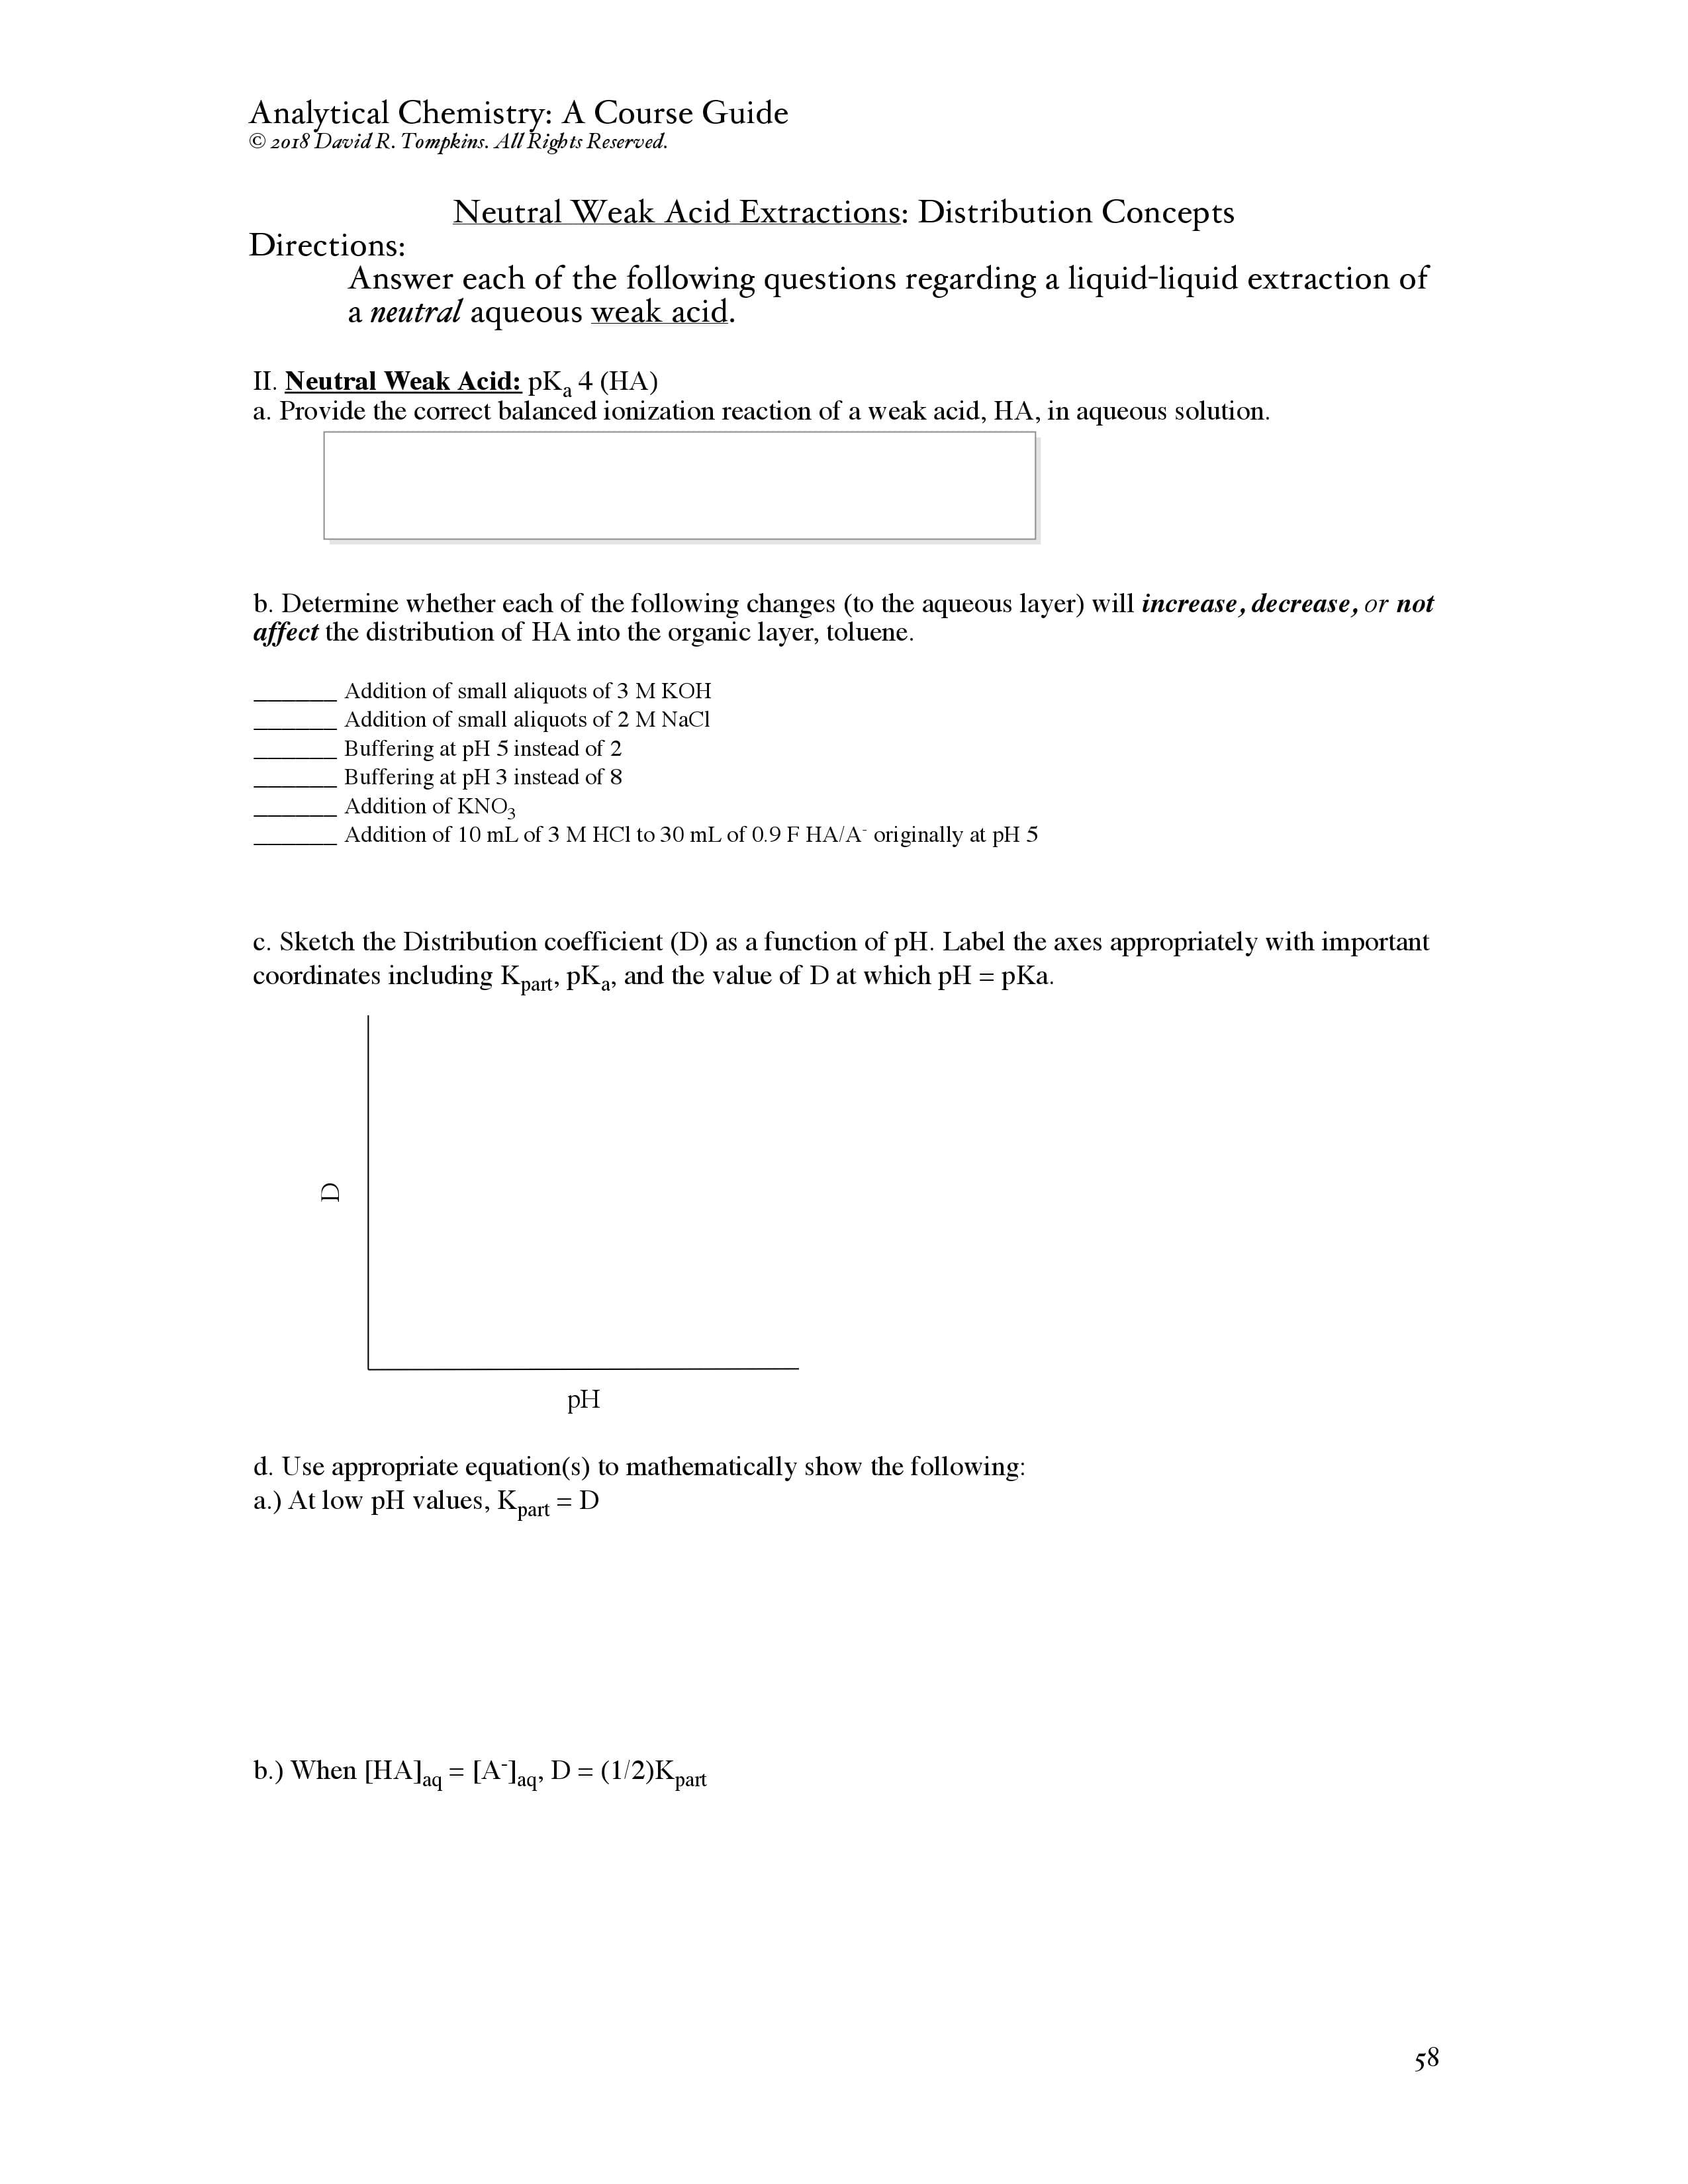 Introduction to Analytical Chemistry Course Guide Example Page 3